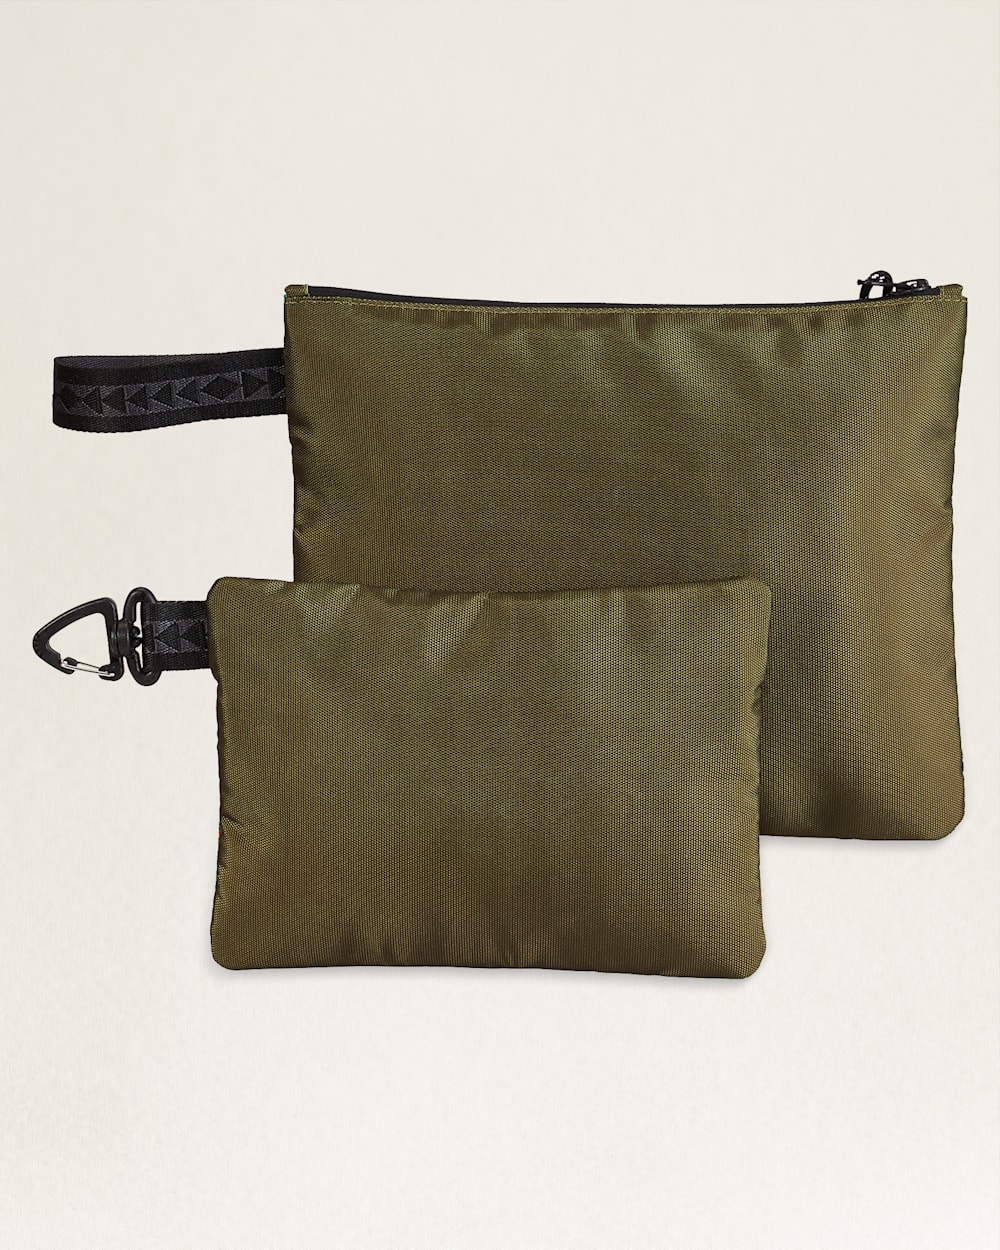 ALTERNATE VIEW OF CARICO LAKE ZIP POUCH SET IN OLIVE image number 2